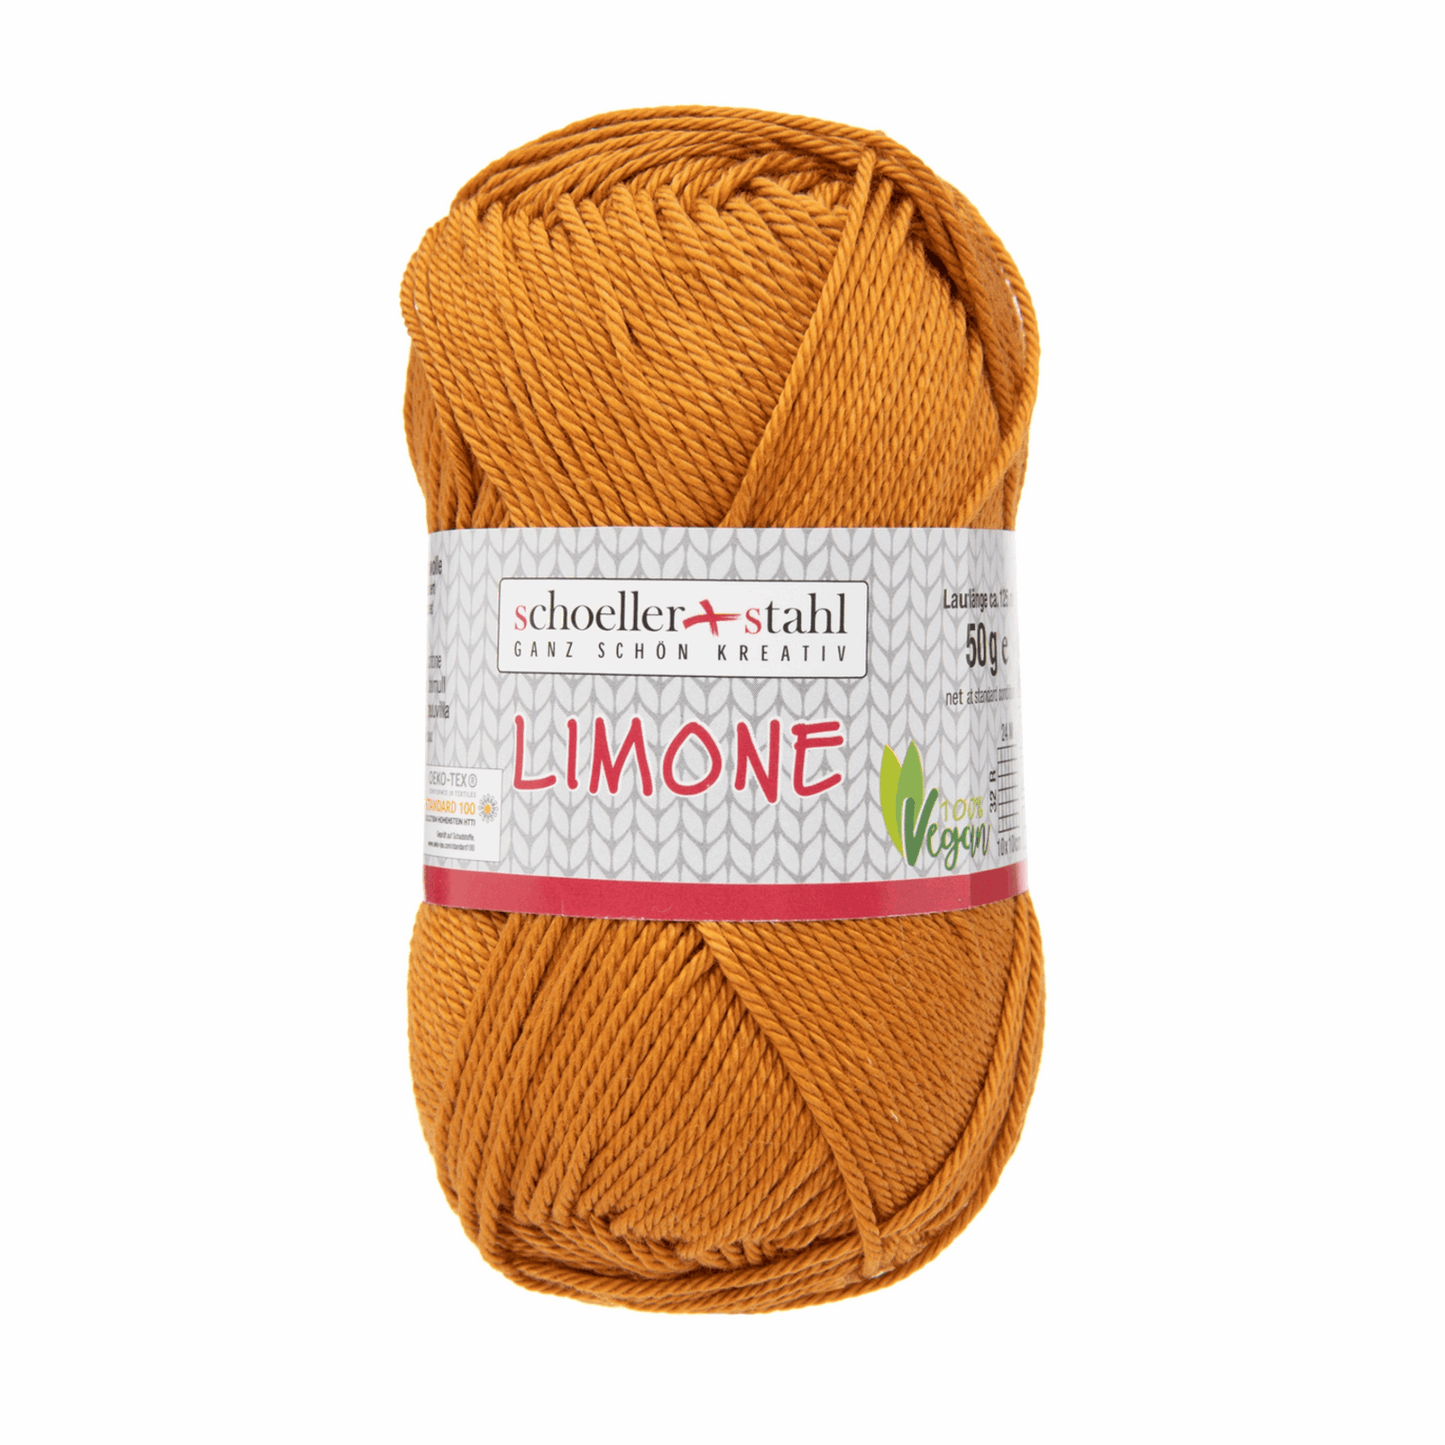 Limone 50g, 90130, Farbe 178, zimt